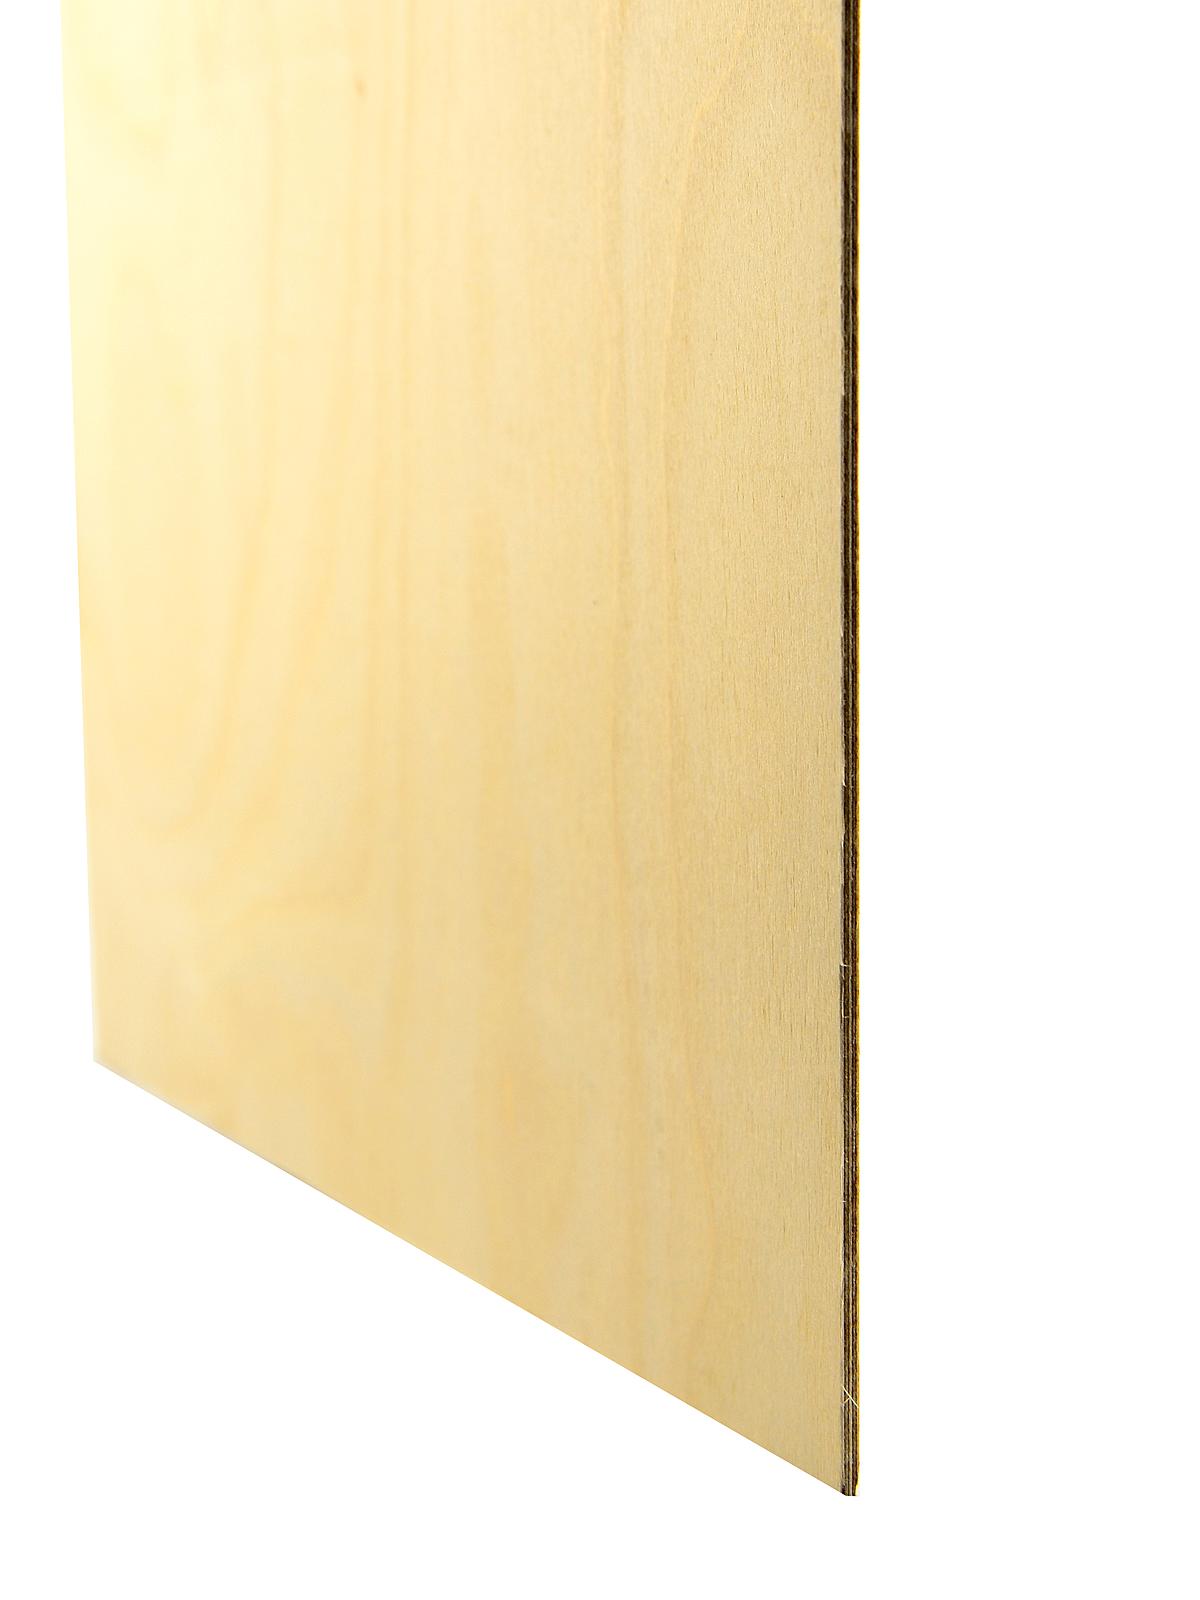 Thin Birch Plywood Aircraft Grade 3 32 In. 12 In. X 24 In.